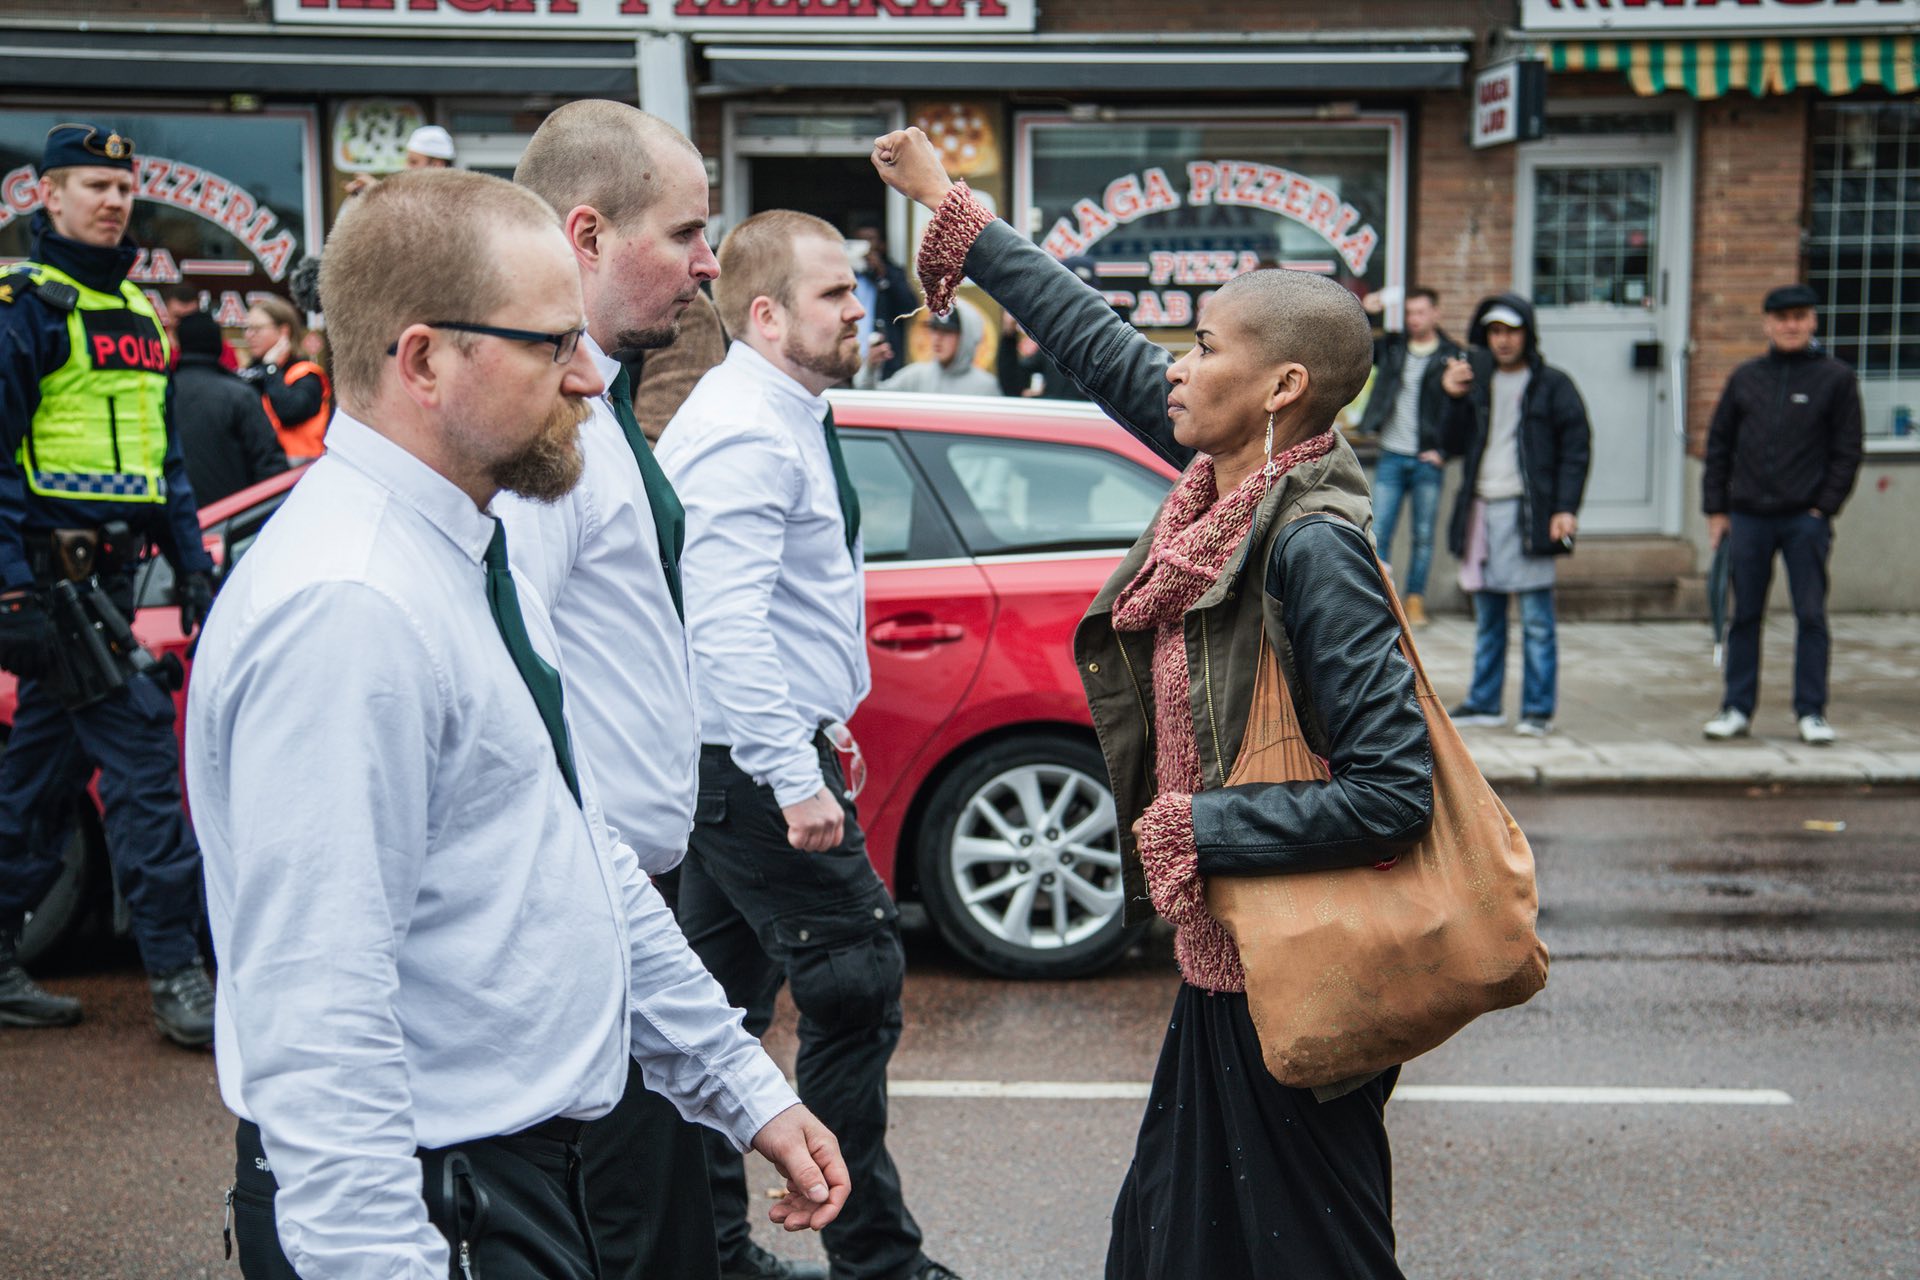 A lone woman stands up to uniformed demonstrators in a Nazi demonstration in BorlÃ¤nge, Sweden on 1 May 2015. PHOTO: AP